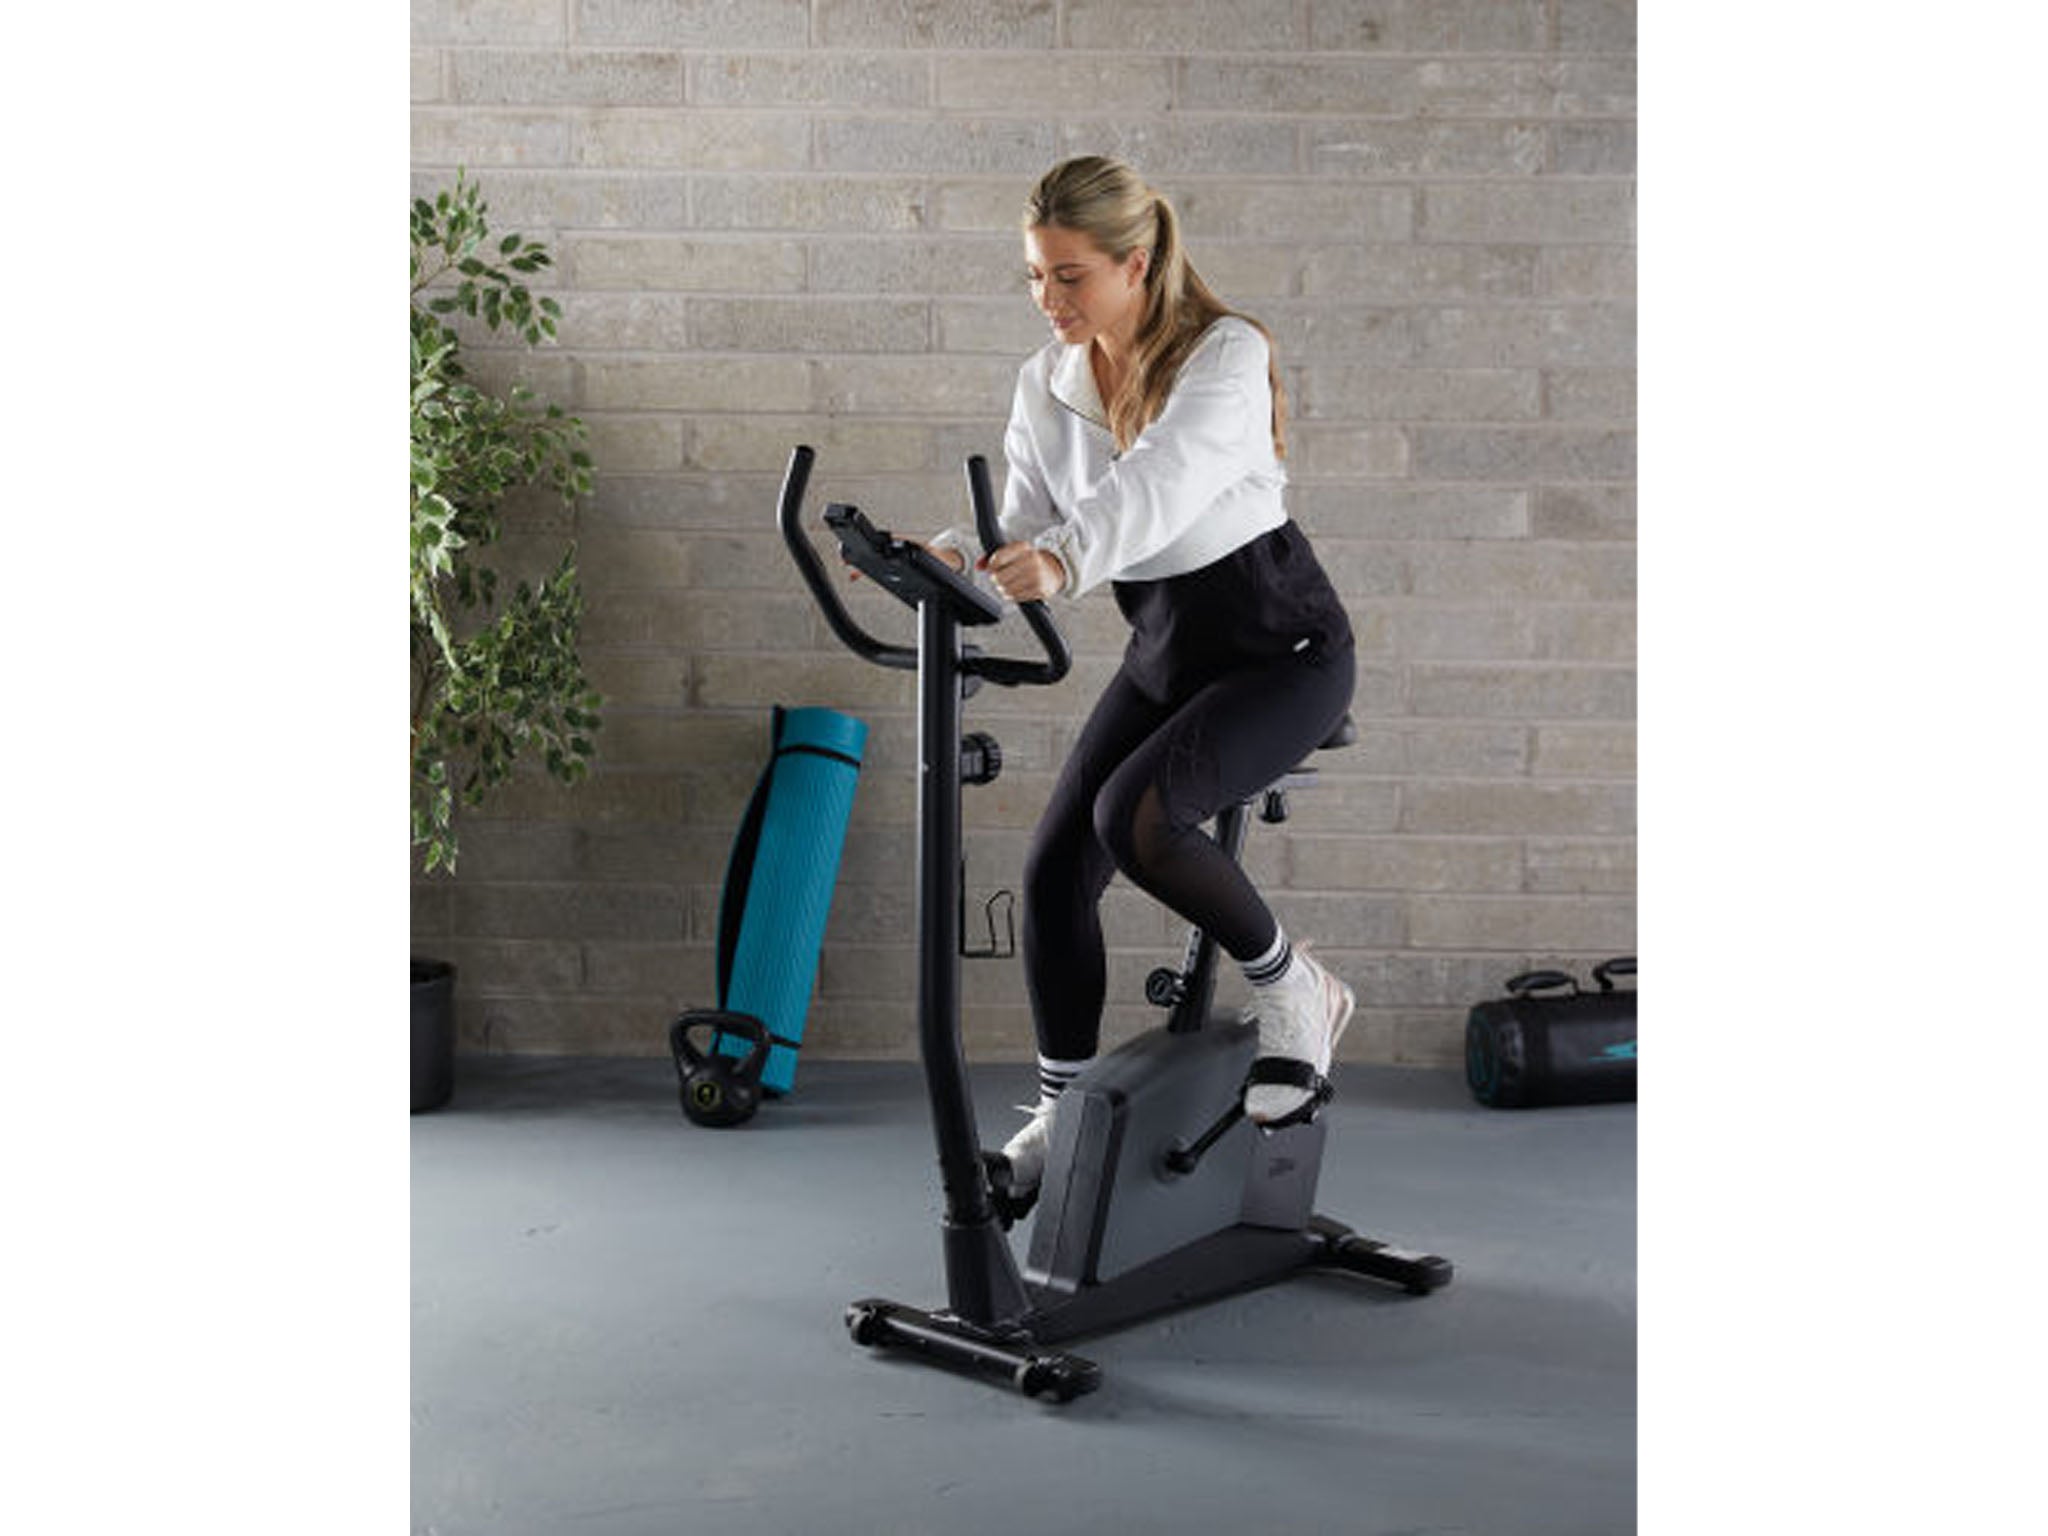 Aldi's exercise bike is back for 2022 to help you smash your